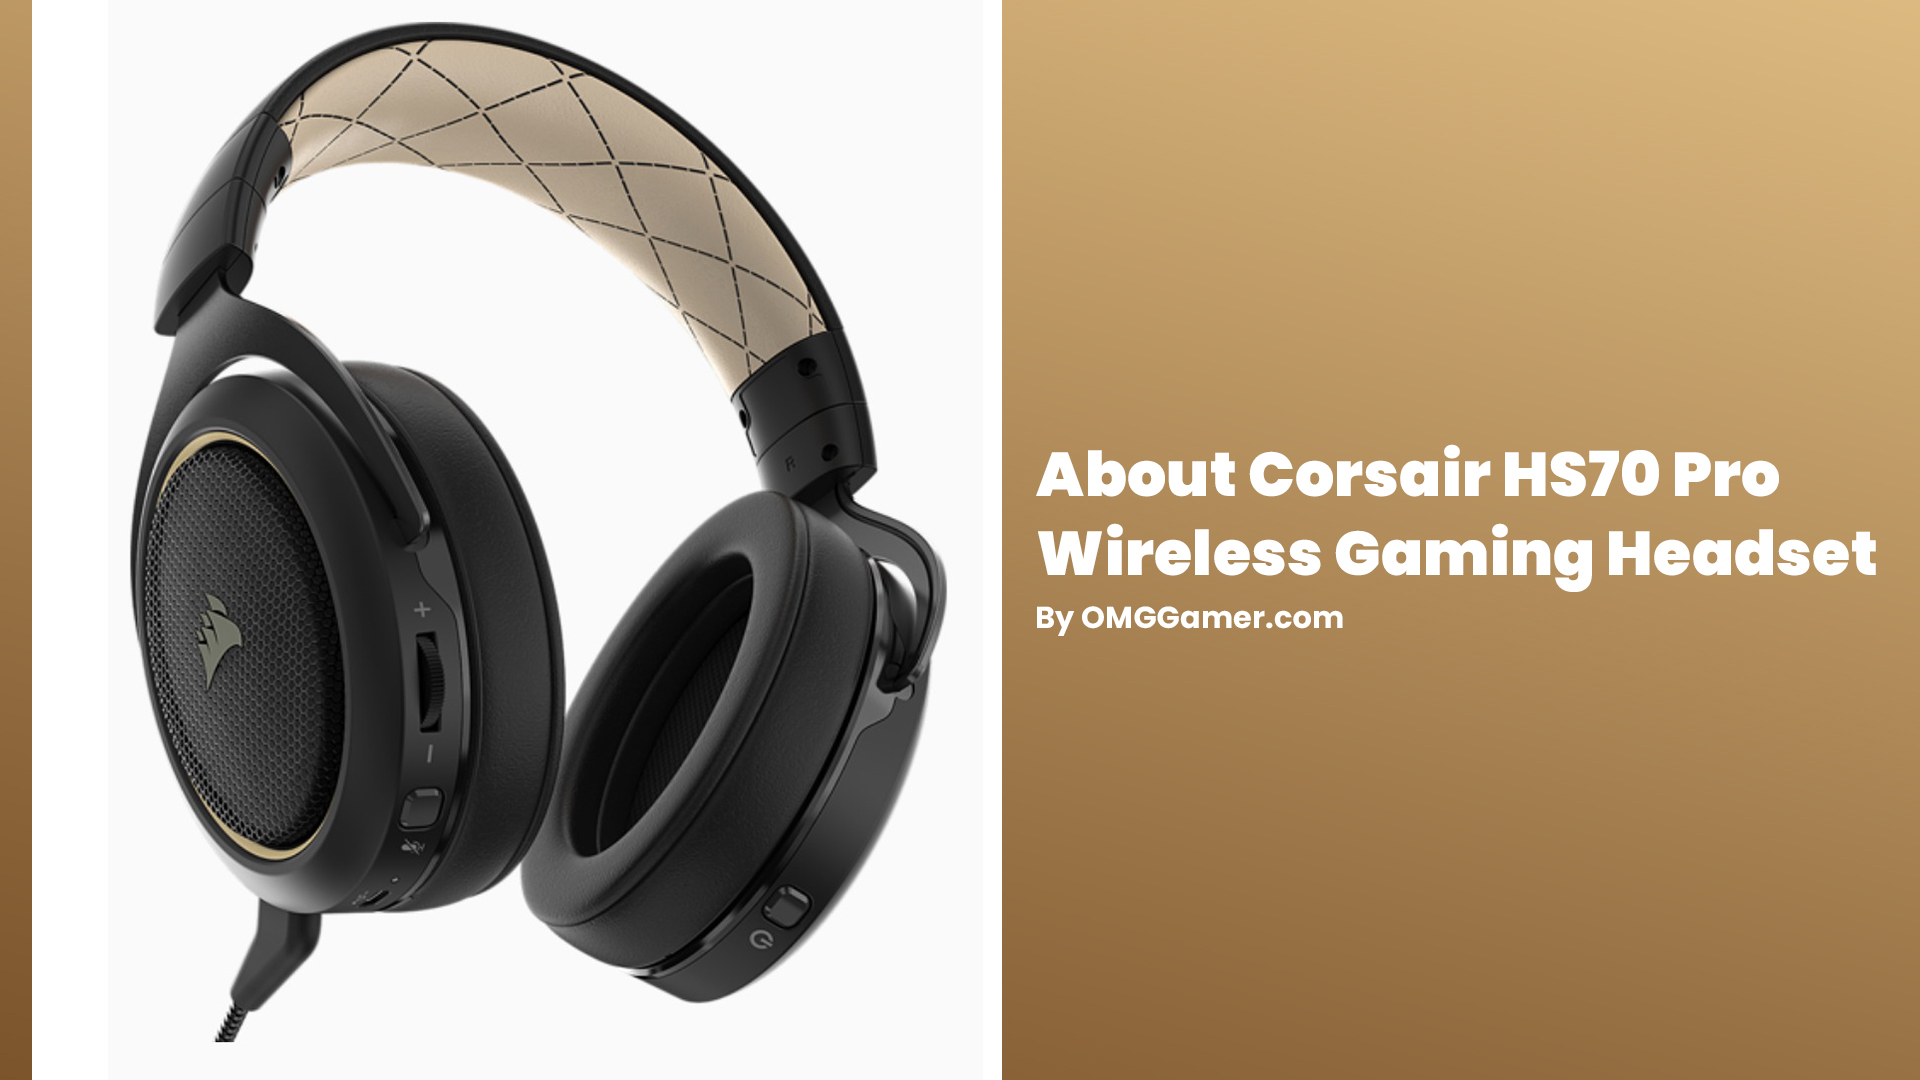 About Corsair HS70 Pro Wireless Gaming Headset